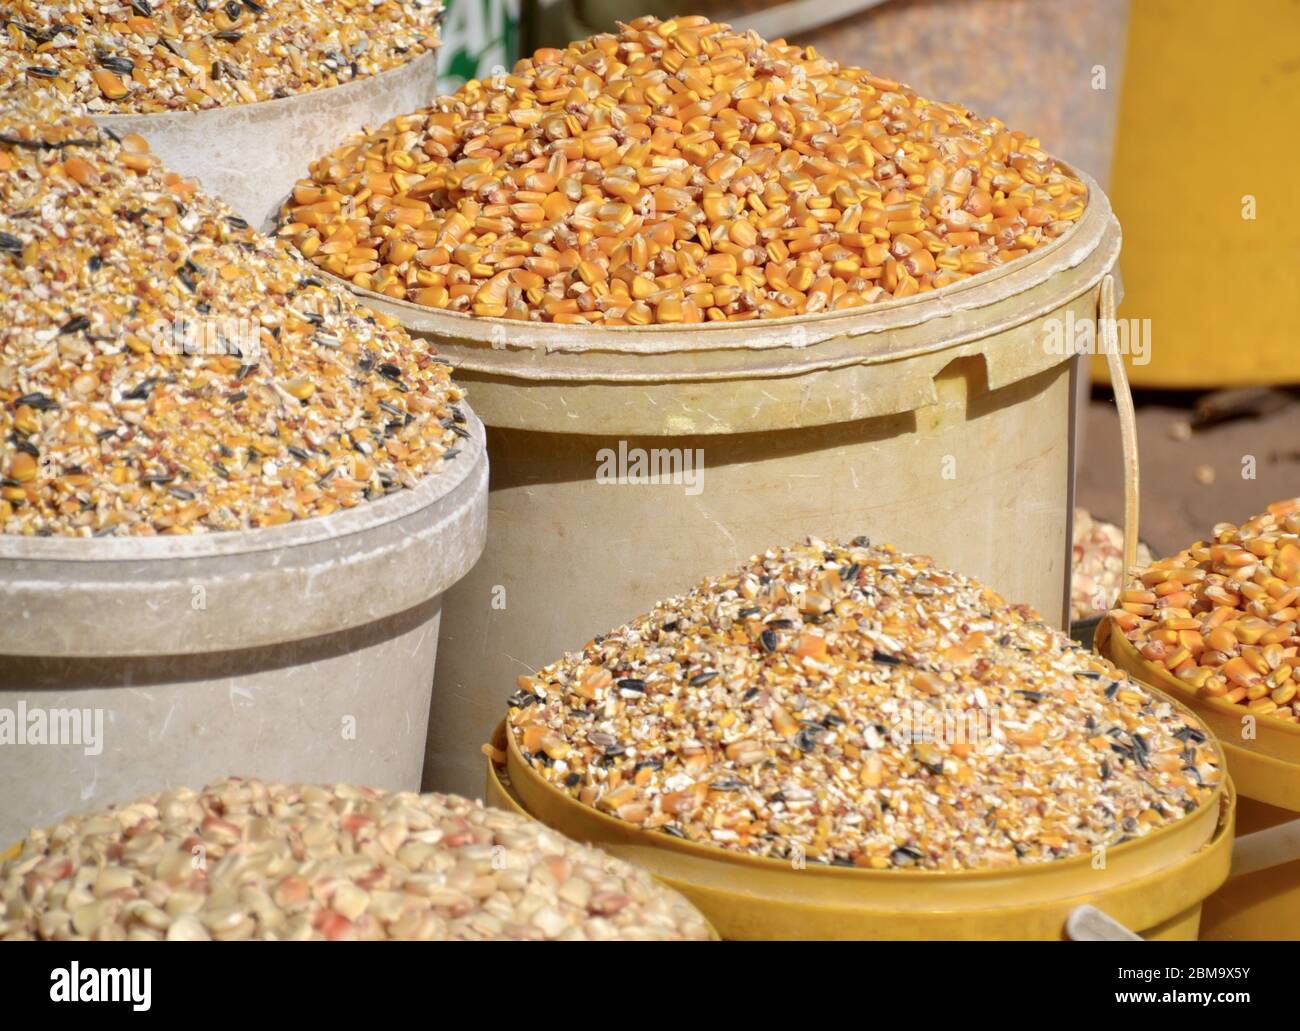 Different varieties of maize, corn and chicken feed meal at an African market in Manzini in Eswatini (Swaziland) Stock Photo